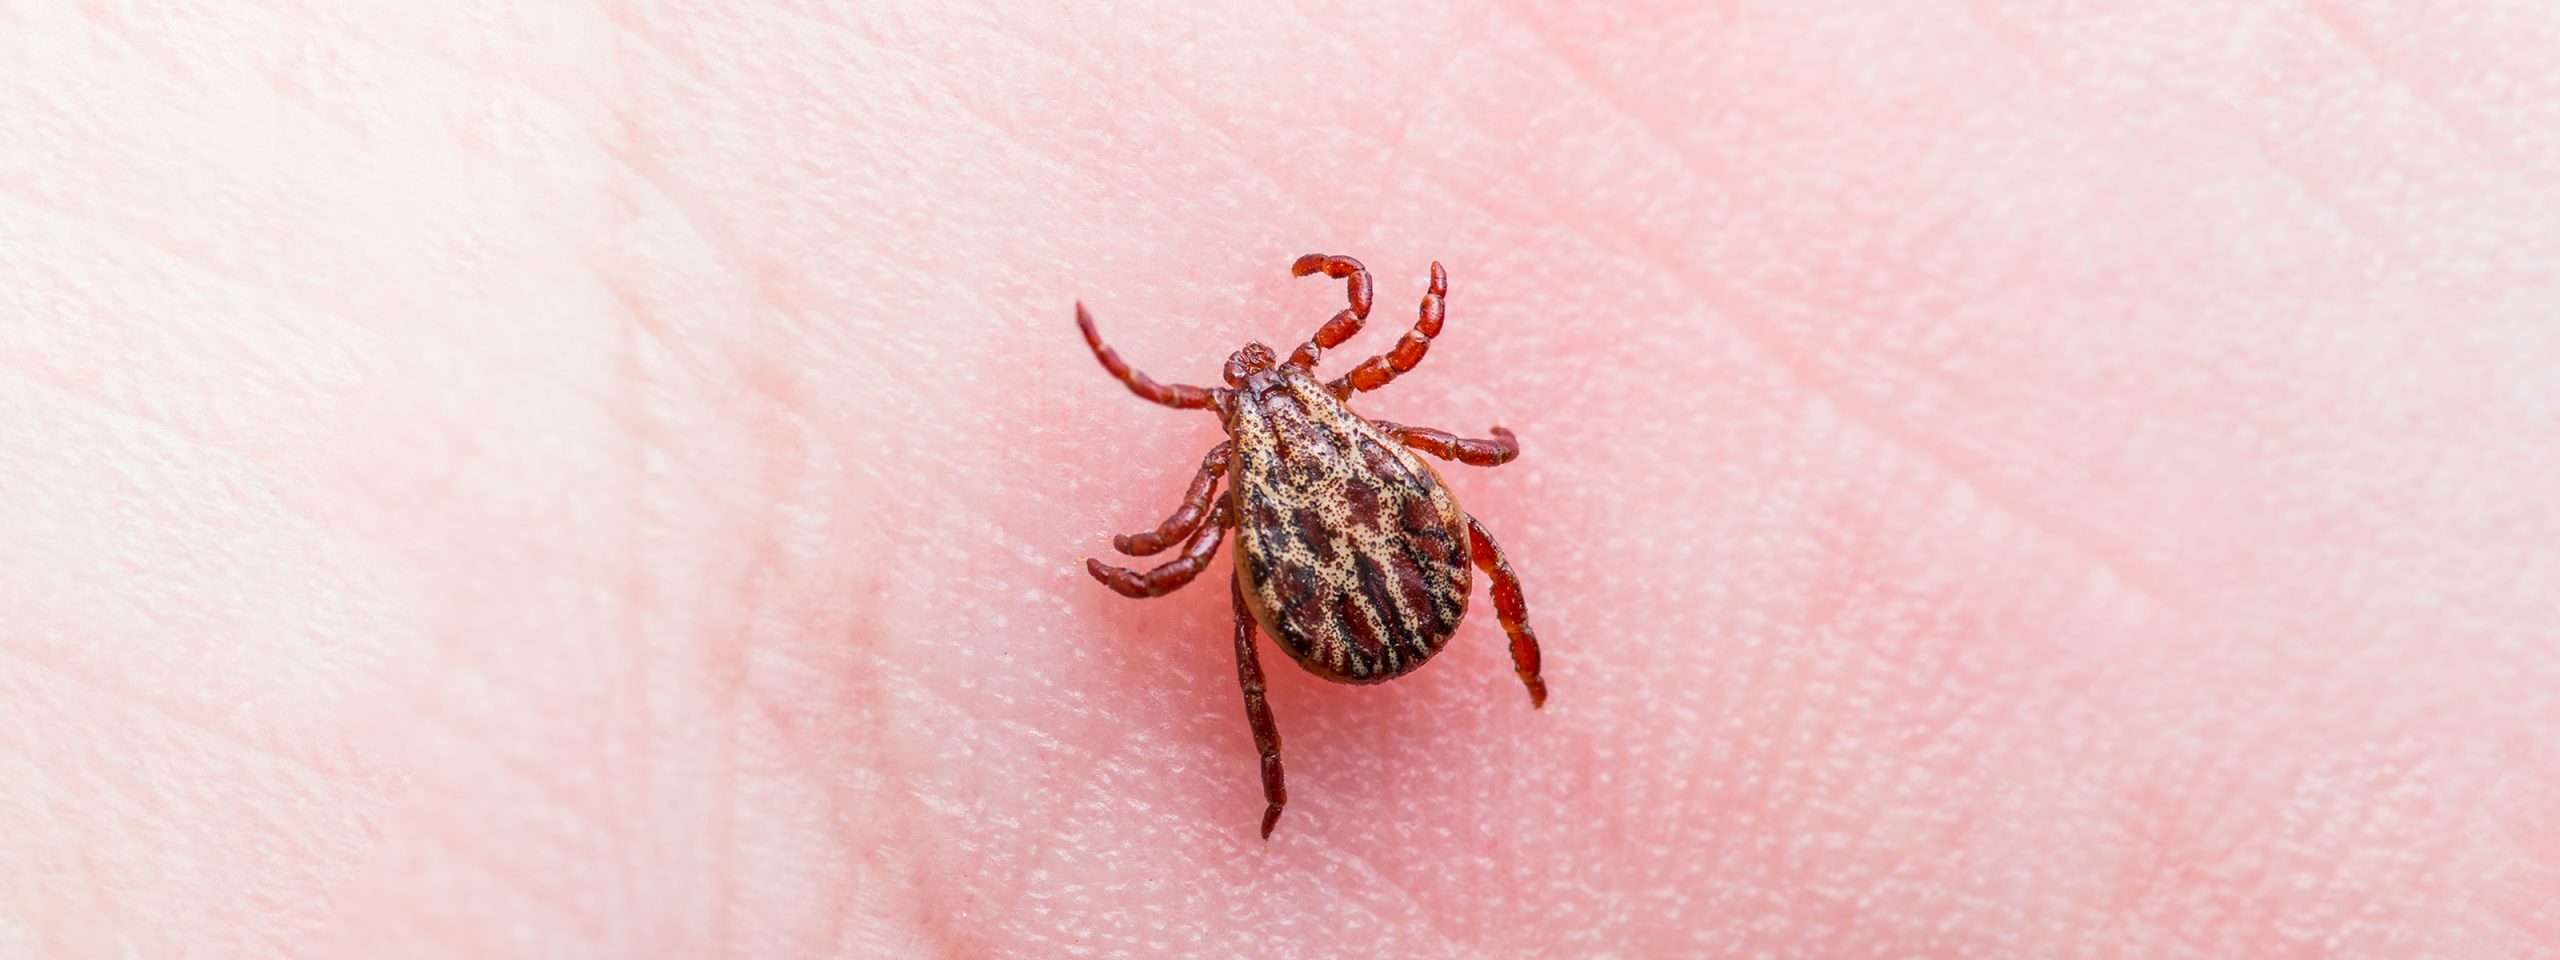 Will We Finally Get Another Lyme Disease Vaccine?